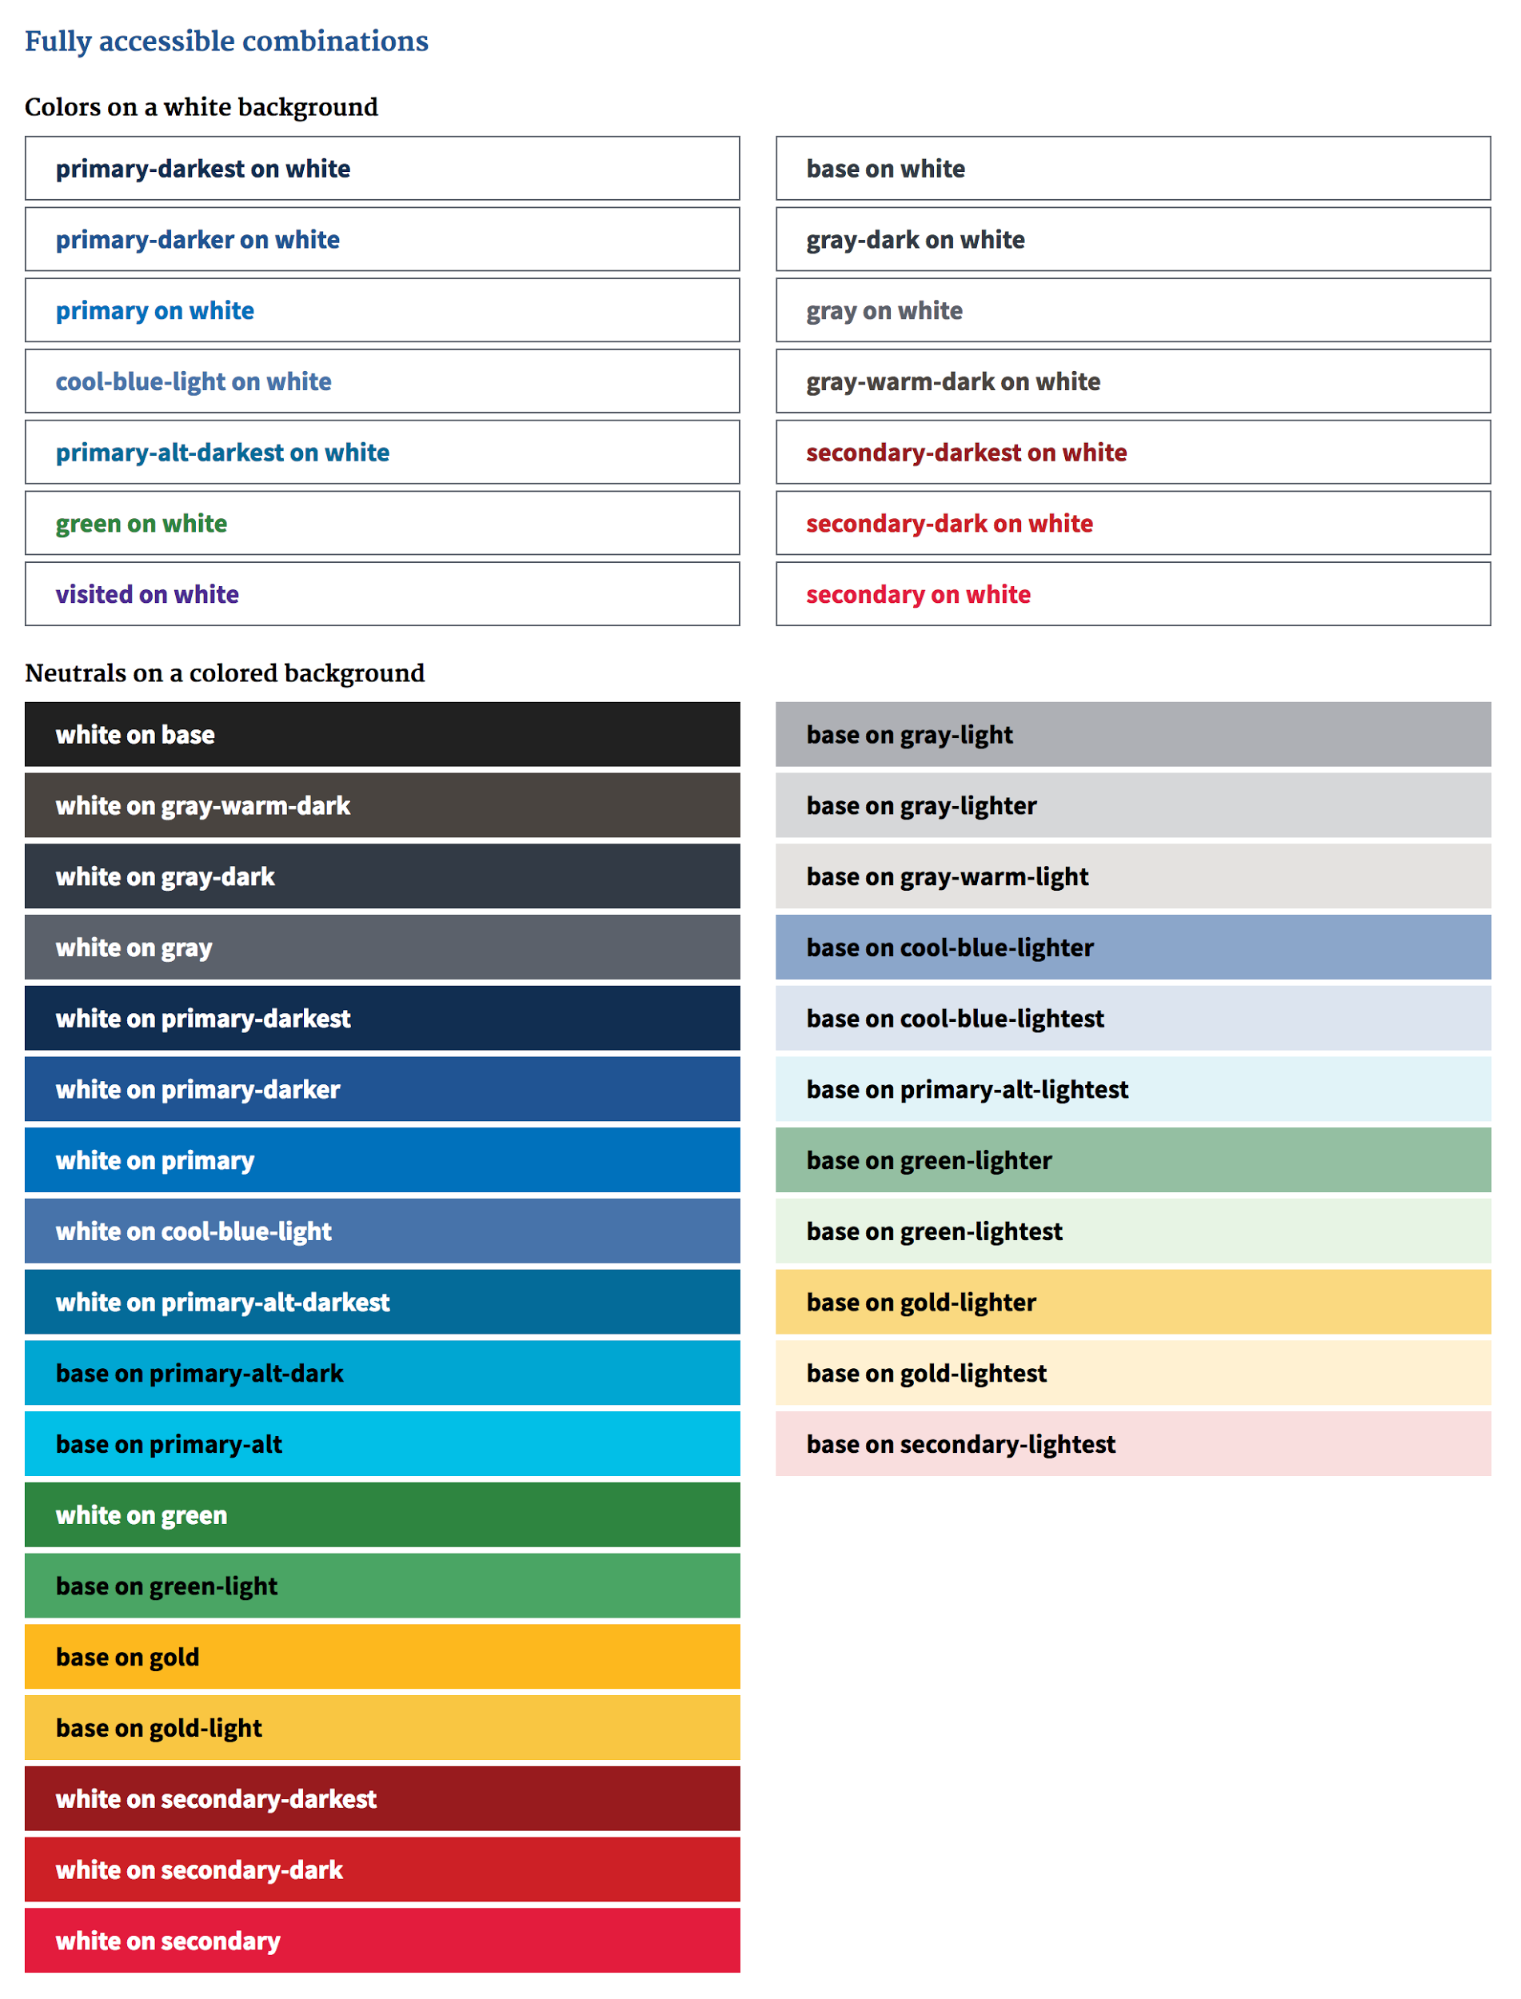 A list of background and text colors that are 508 compliant. The list starts with colors on white backgrounds and the second section are neutrals on colored background